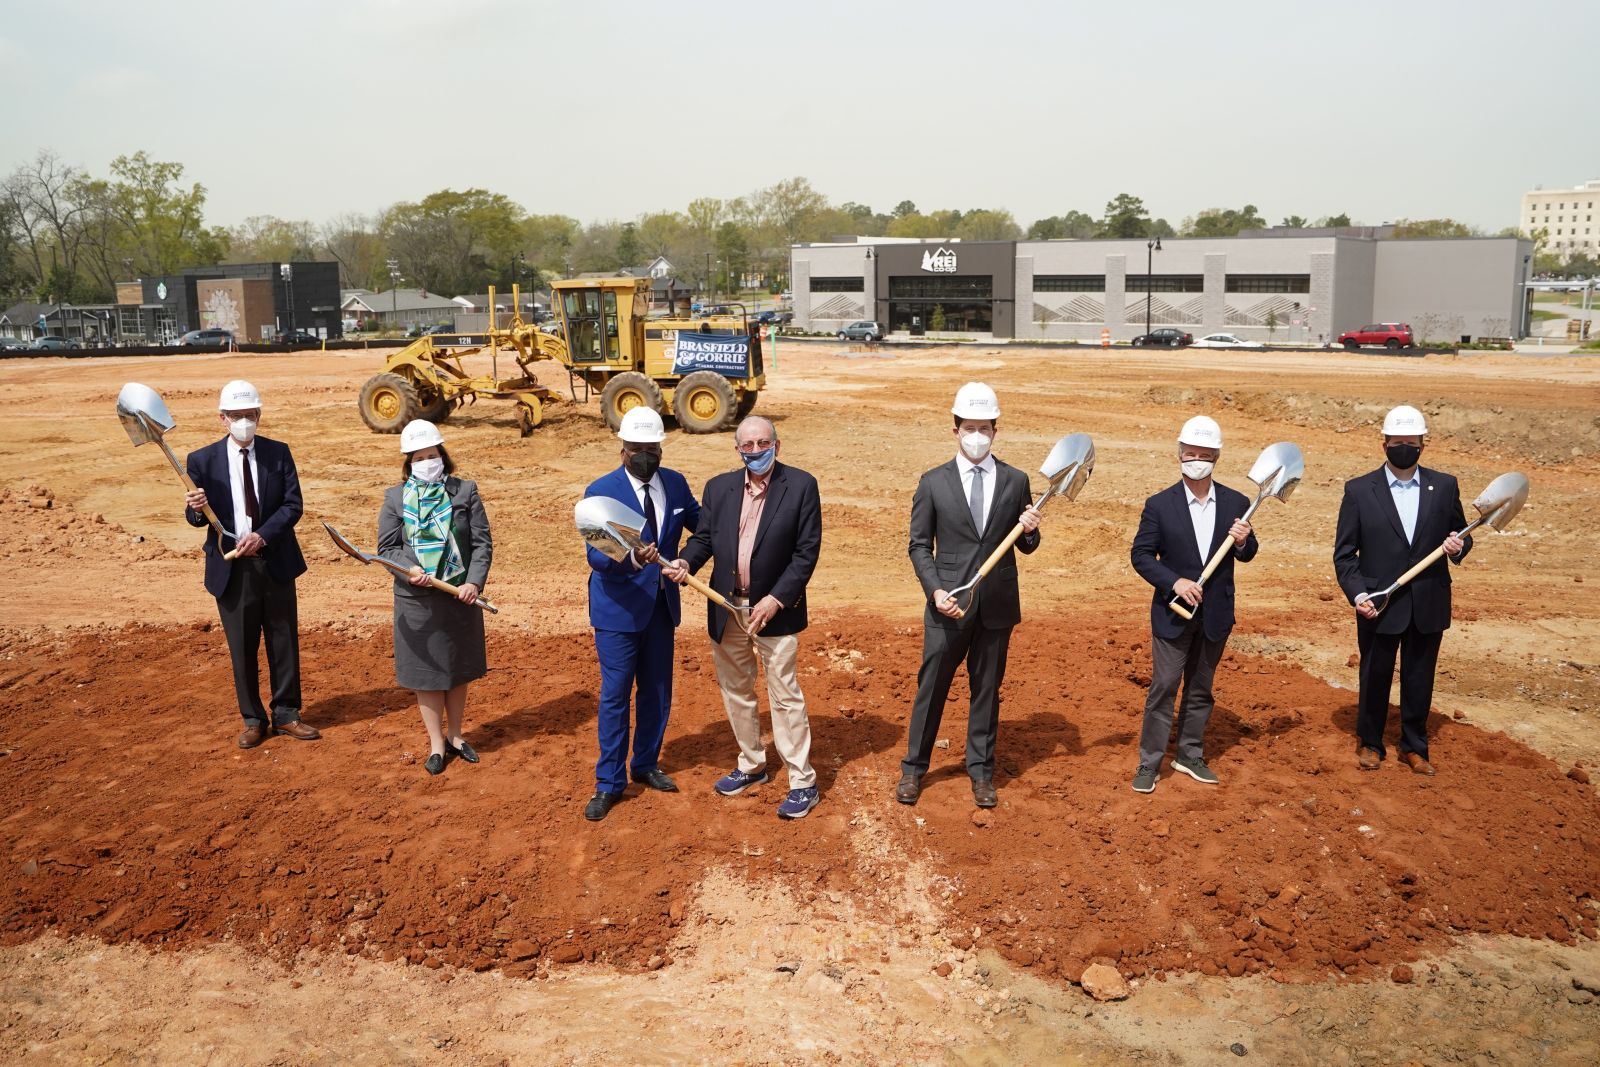 Columbia officials, including Mayor Steve Benjamin (in blue suit) and developers including Robert Hughes, president of Hughes Development Corp. (third from right) break ground Thursday on the WestLawn building. (Photo/Sean Rayford)